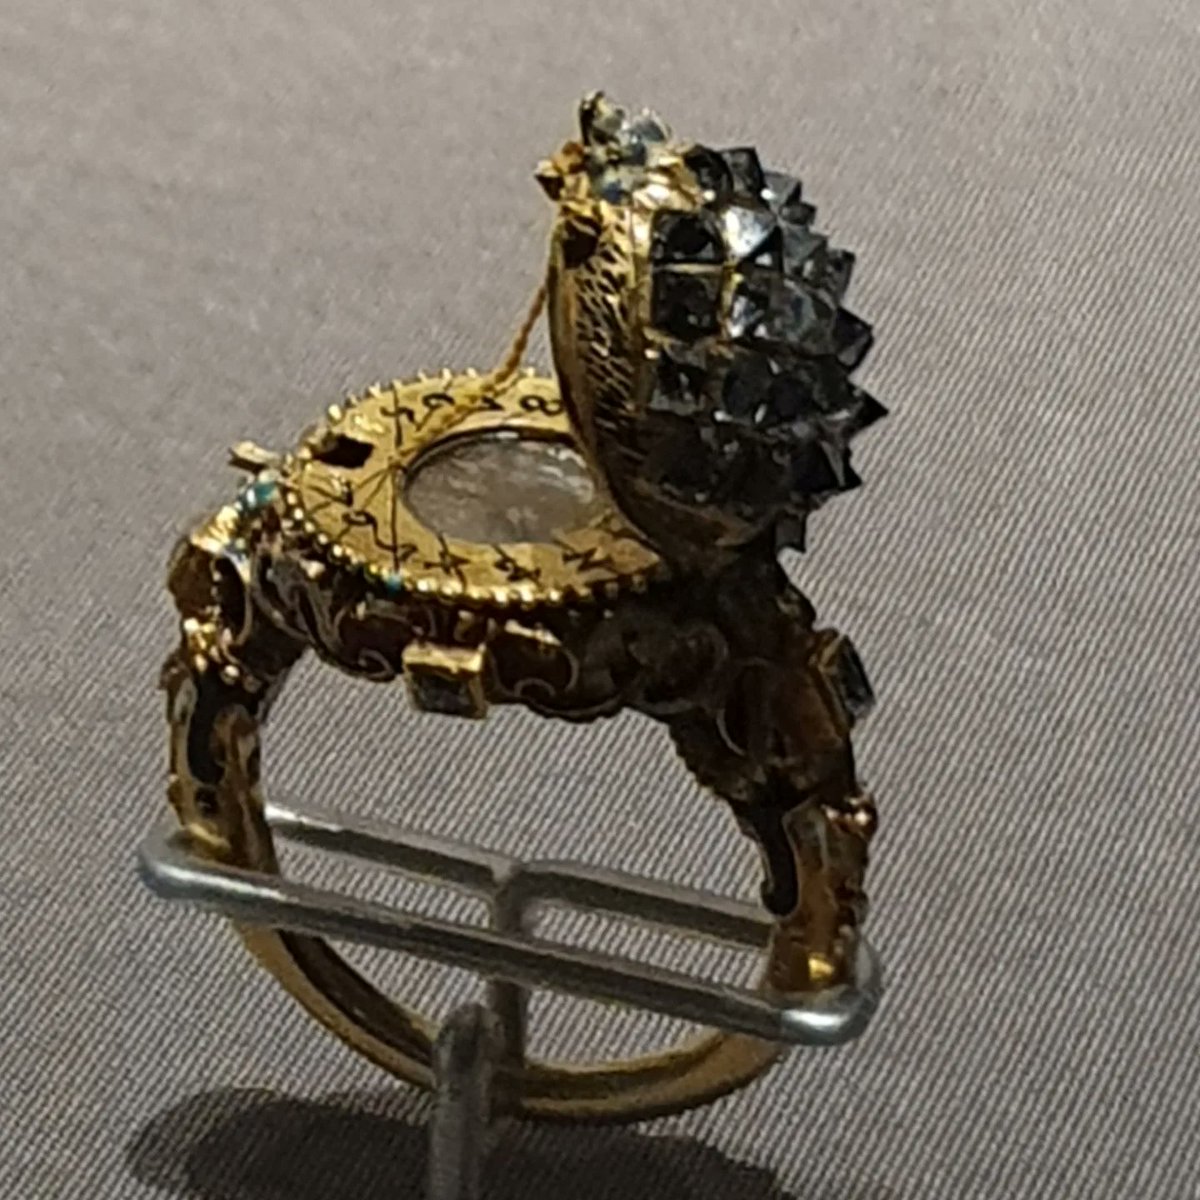 This #JewelryFriday👑 i present you a Sundial in the form of a #hedgehog 🦔 from 1580 (produced in #Augsburg) in the collection of the @KHM_Wien✨️ The accurate depiction and studying of flora (1/2)

#materialculture #earlymodernperiod #germany #Austria #Vienna